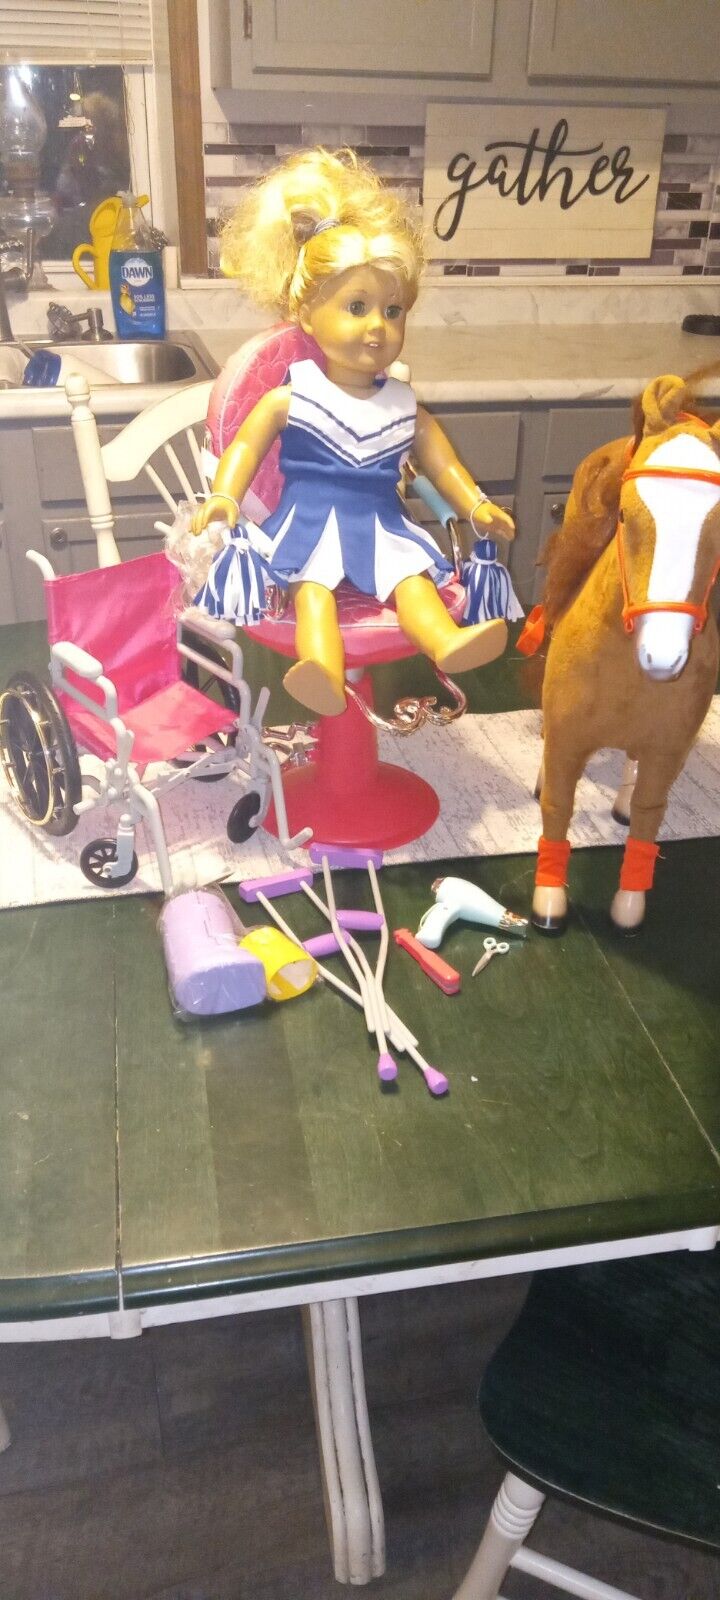 American Girl  Kailey And Accessories  Lot Reduced To $ 55.00